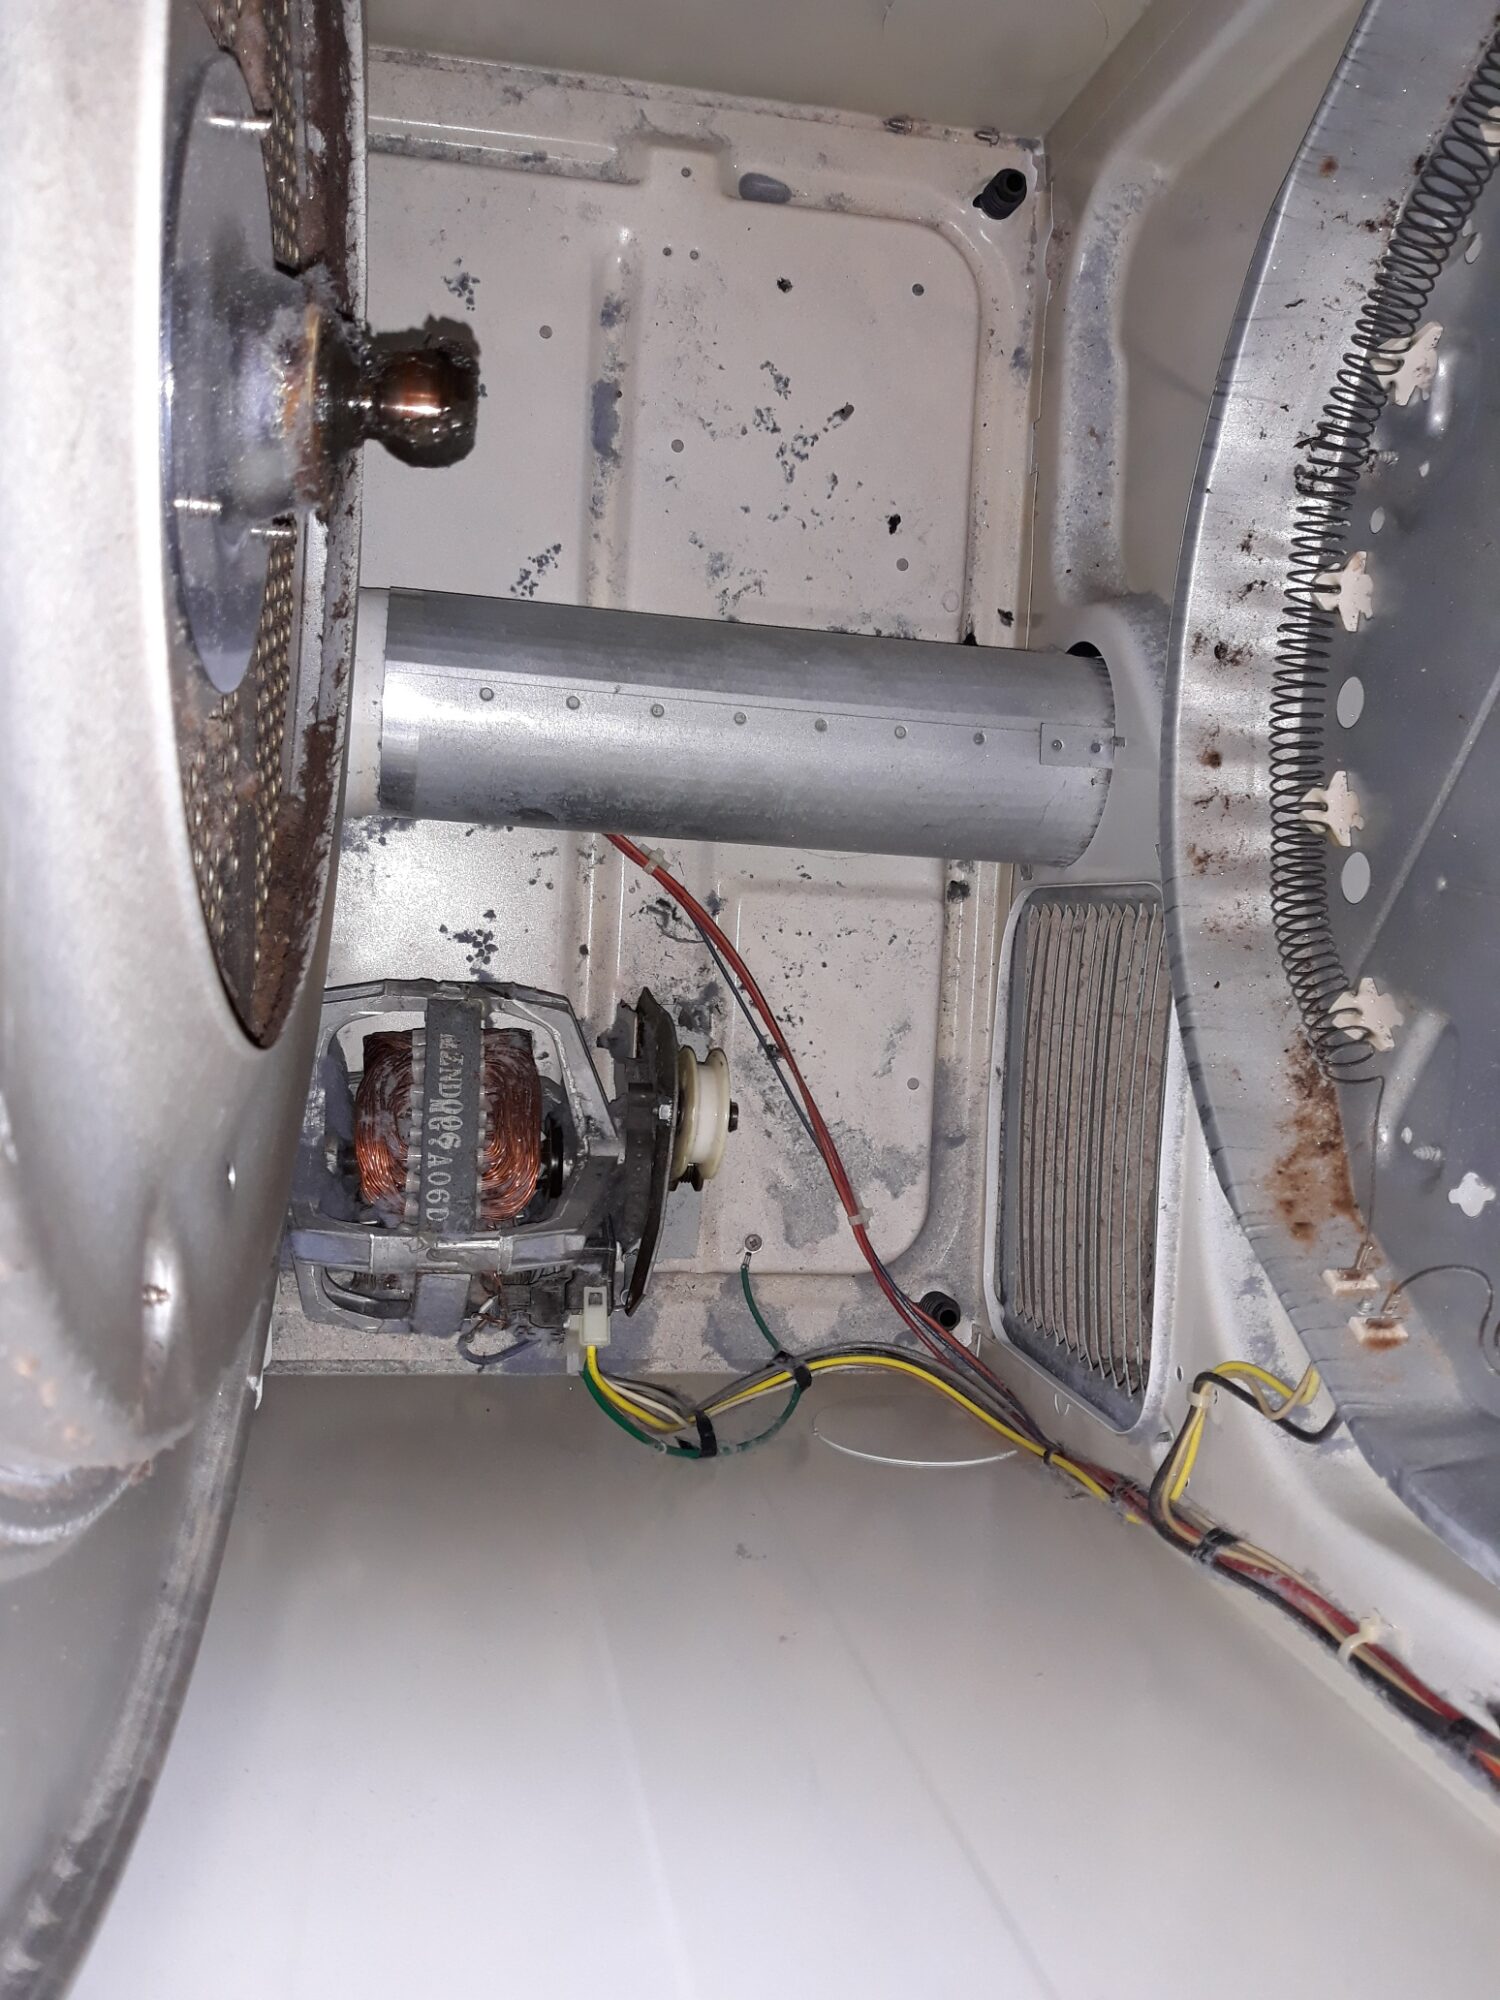 appliance repair dryer repair repair required replacement of the drum bearing assembly orchid st atlantic beach fl 32233